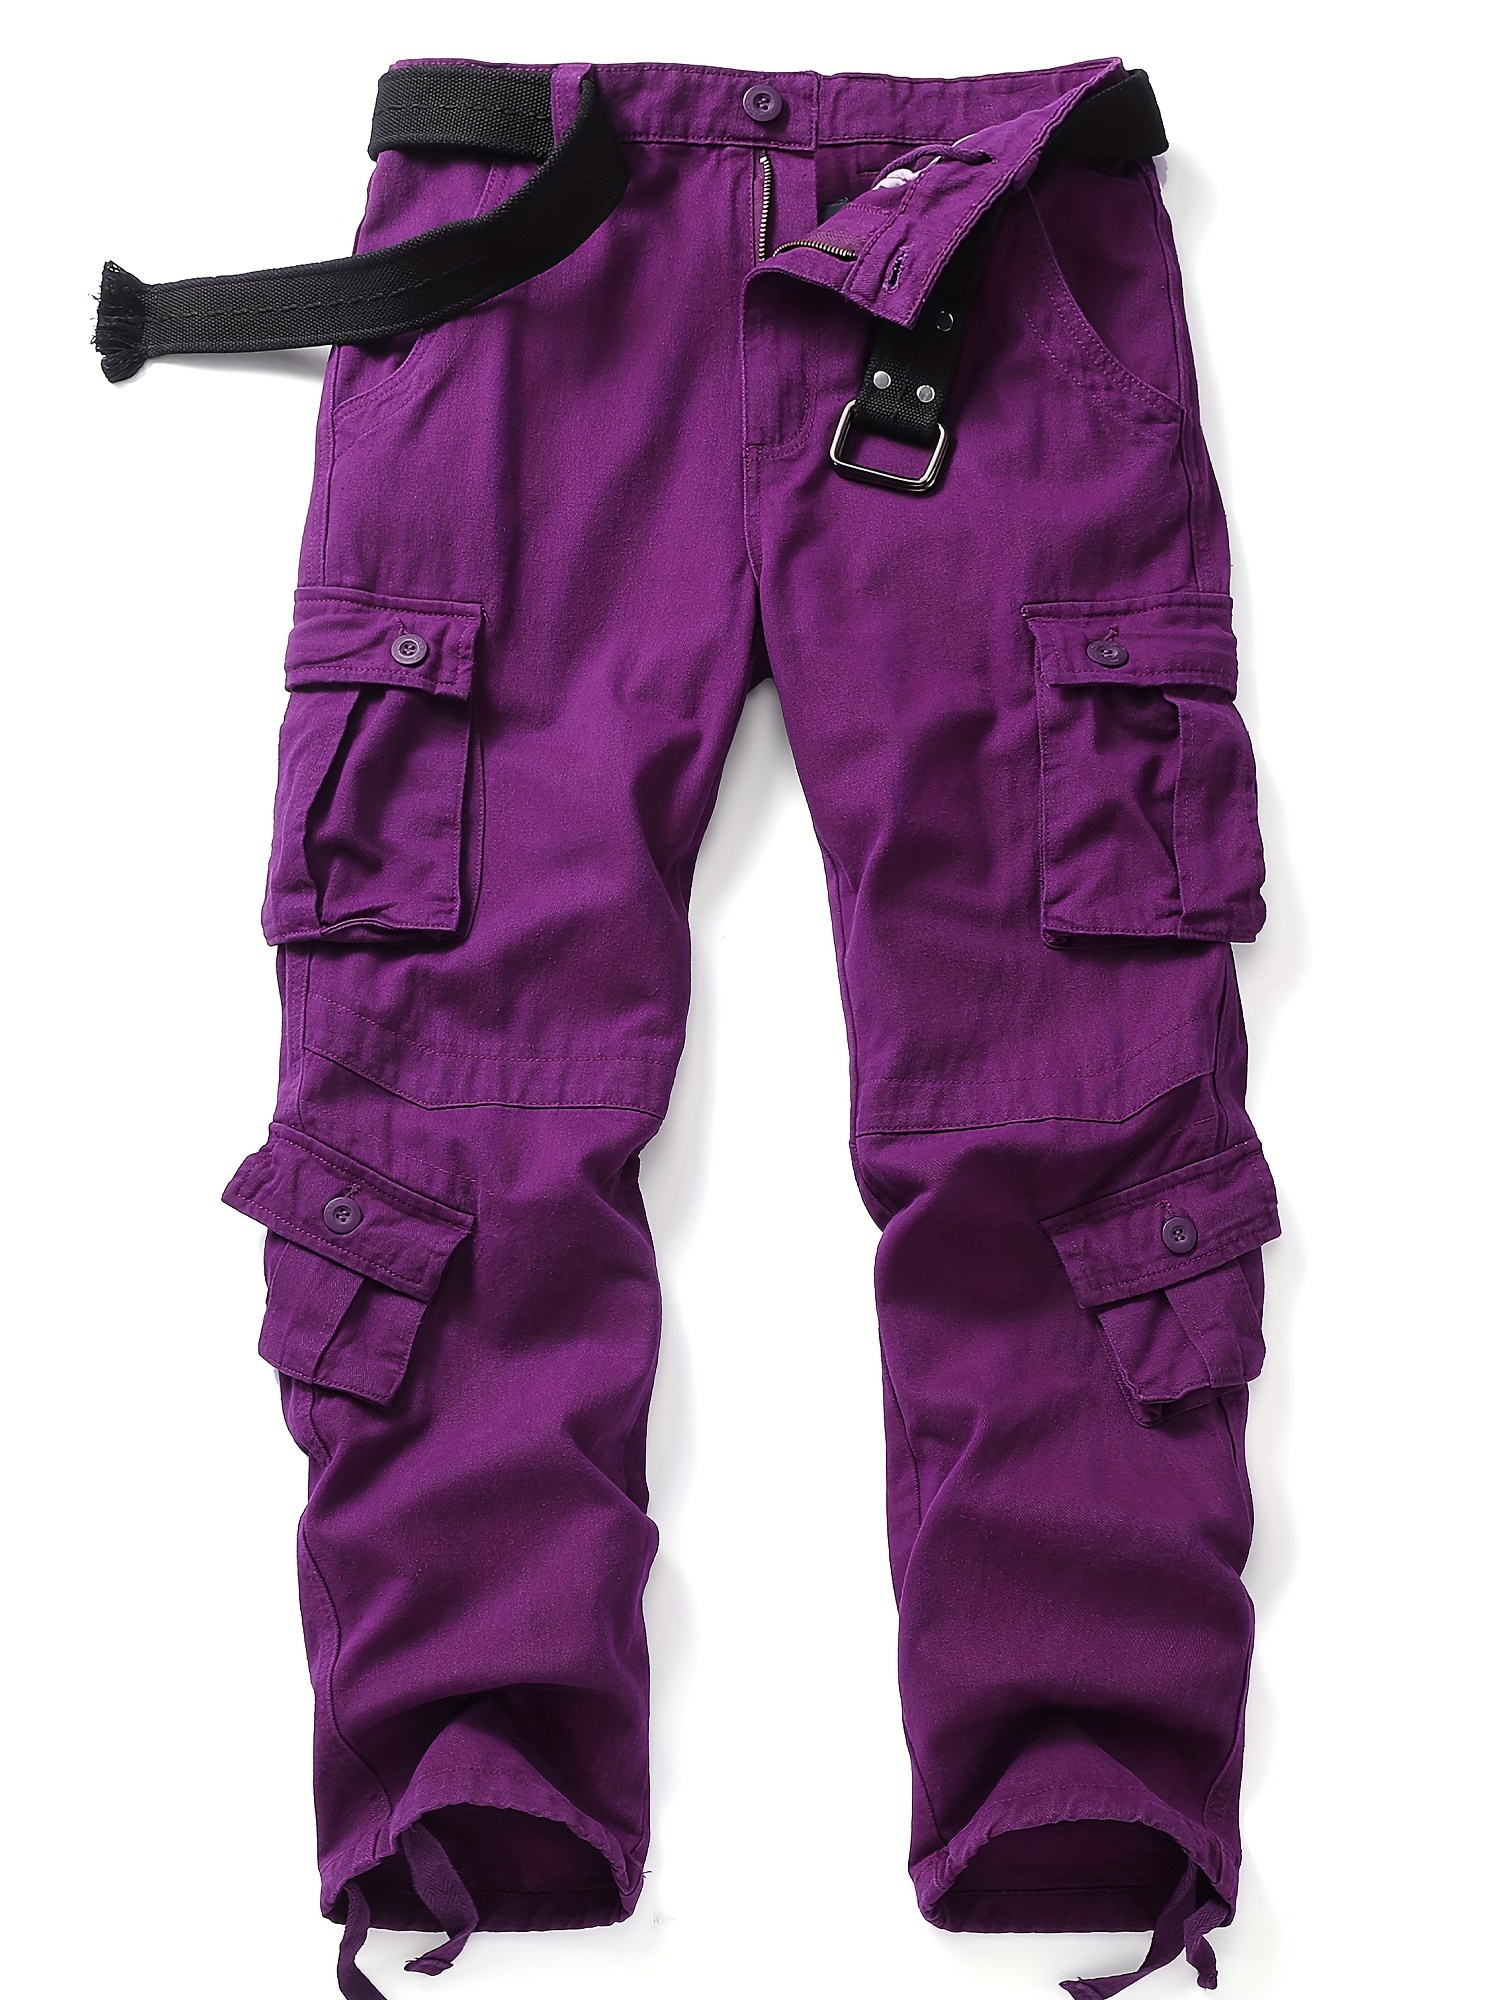 Ladies Cargo Combat Work Trousers Size 6 to 26 in Black or Navy By SITE KING